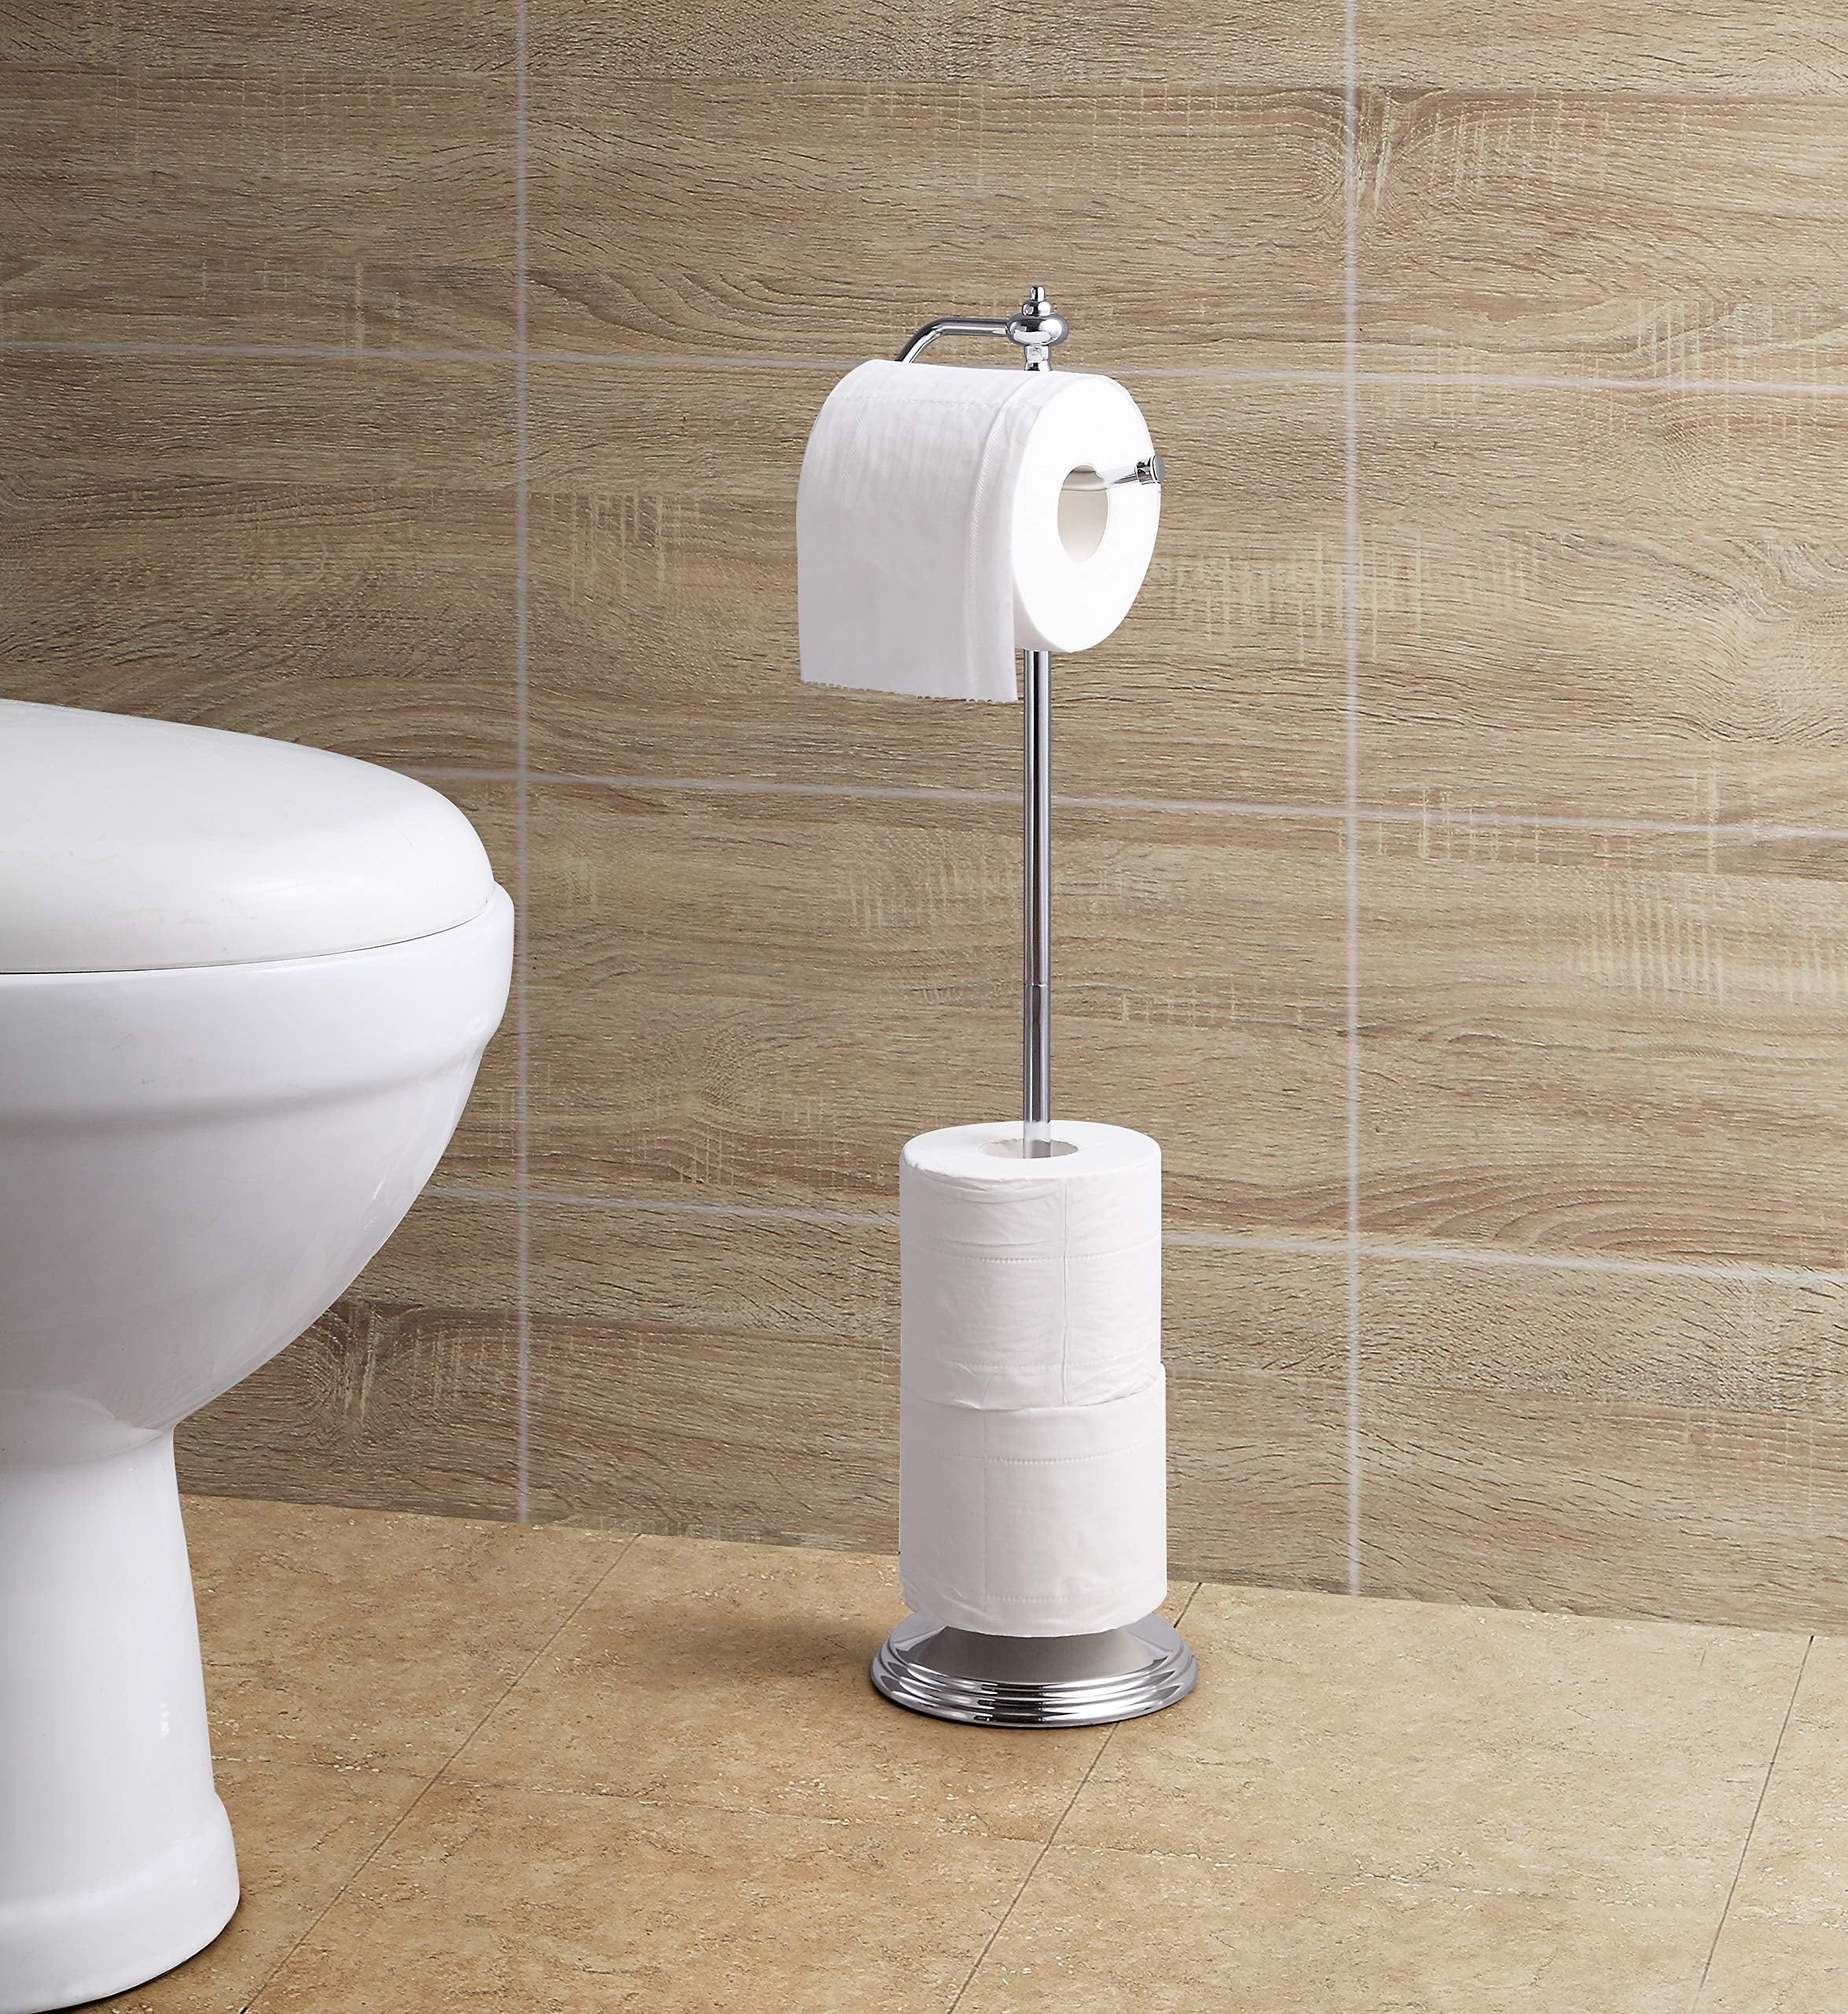  SunnyPoint Classic Bathroom Free Standing Toilet